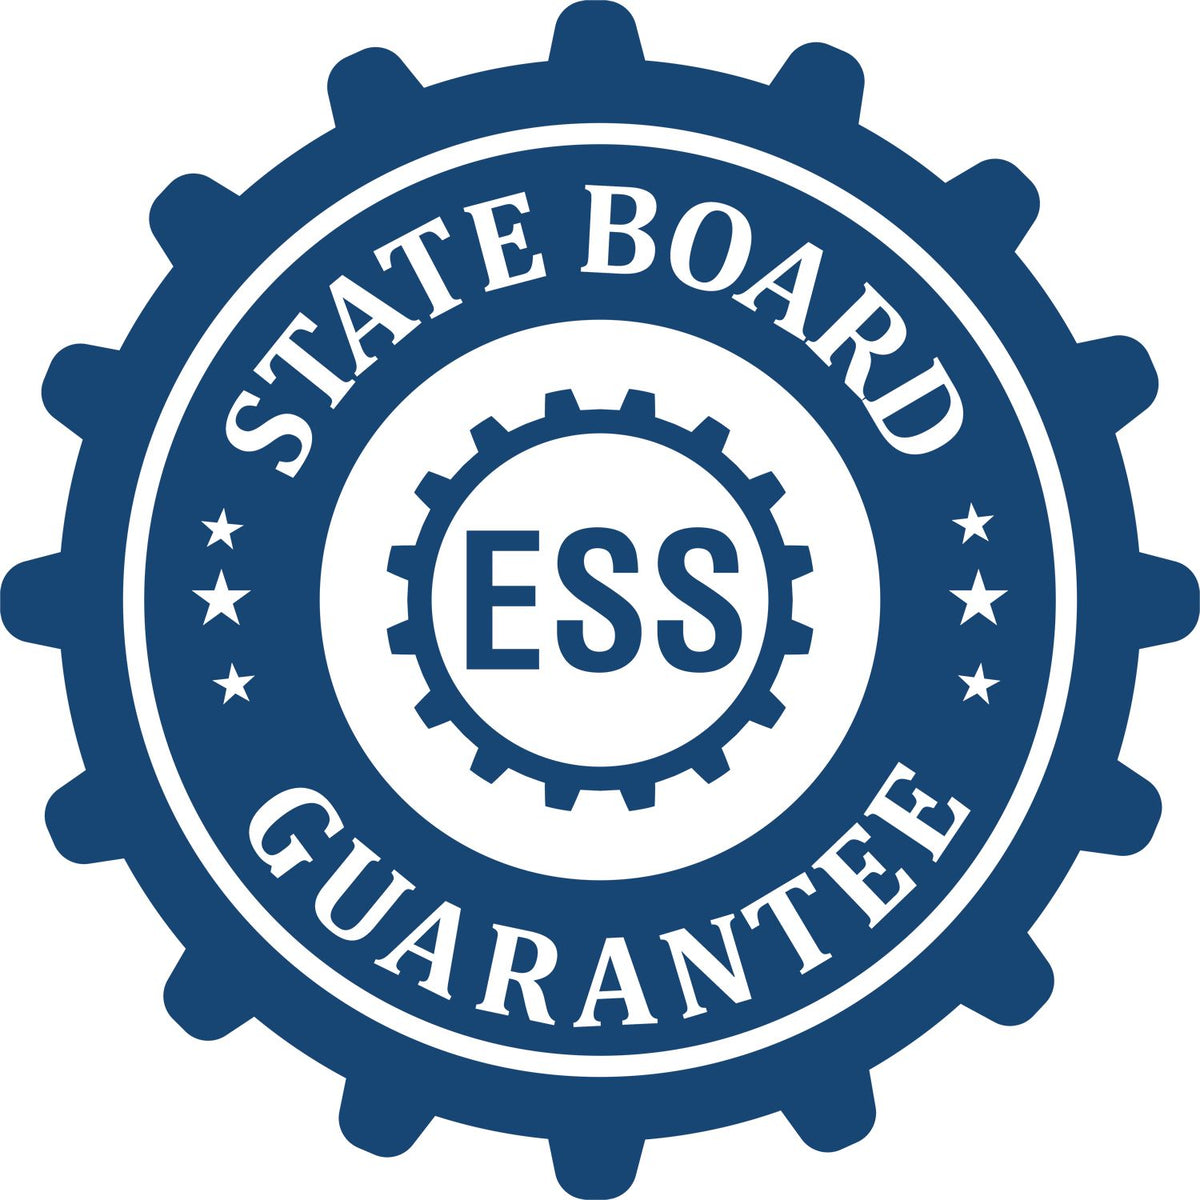 An emblem in a gear shape illustrating a state board guarantee for the Self-Inking Rectangular Florida Notary Stamp product.